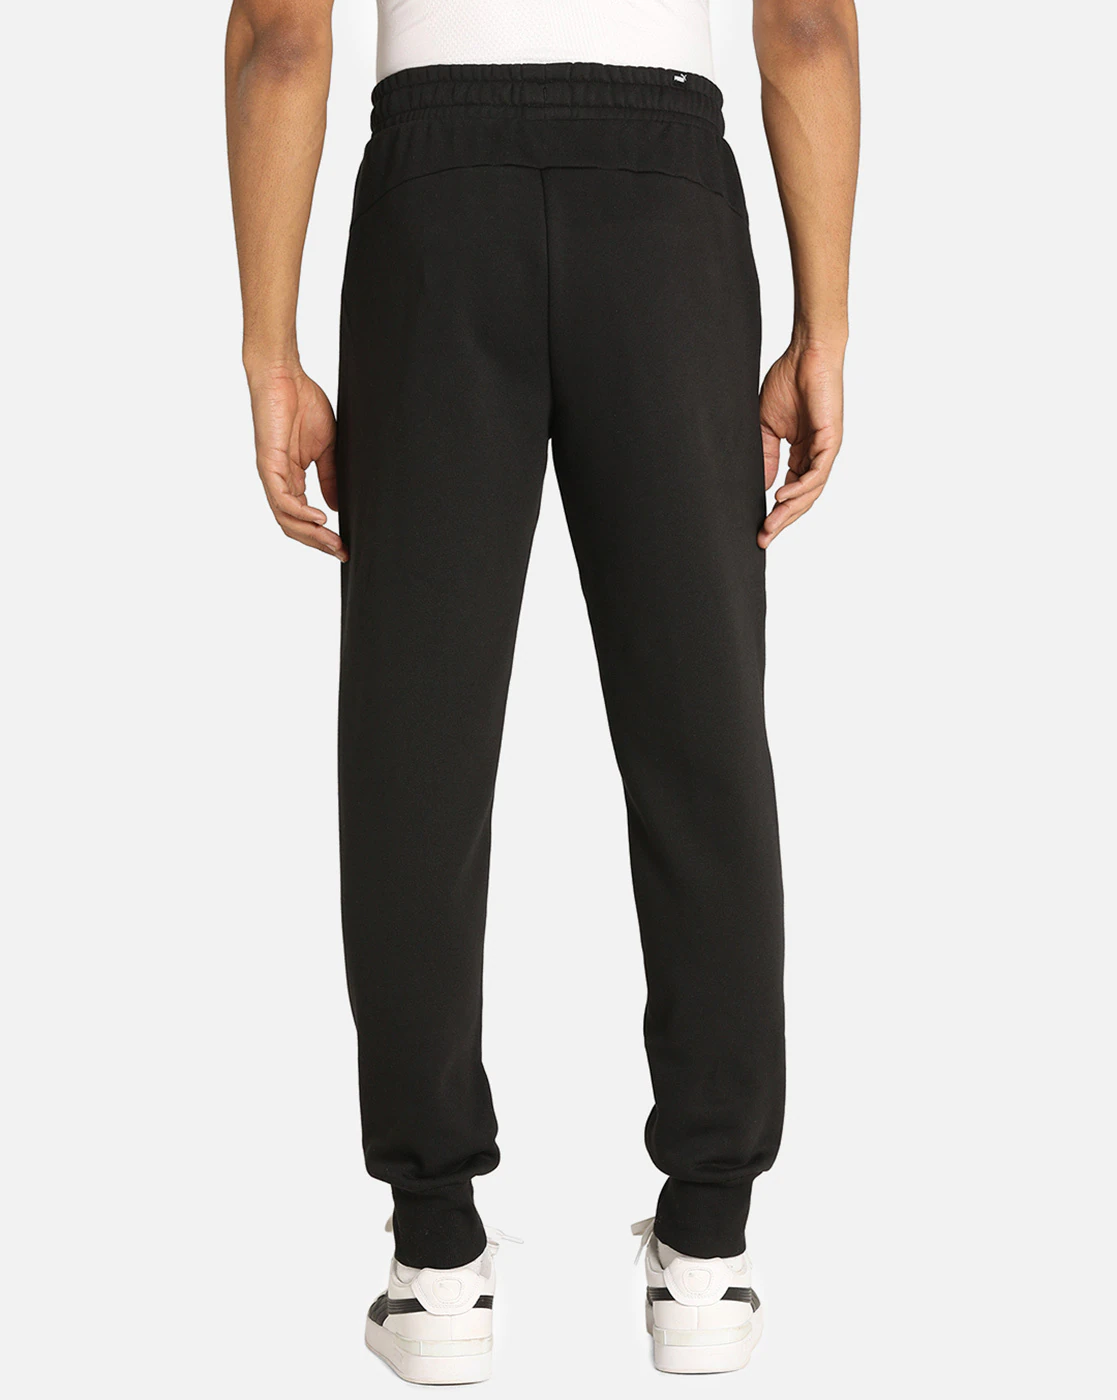 Cuffed Joggers with Insert Pockets-586714 01